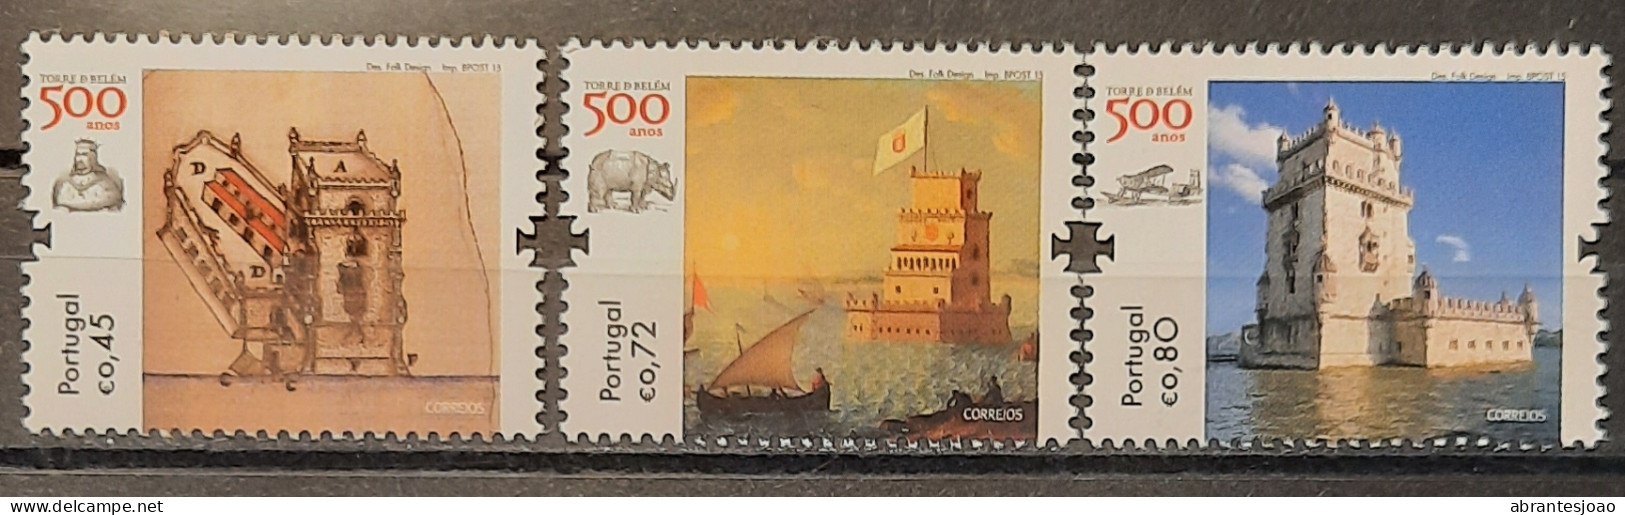 2015 - Portugal - MNH - Tower Of Belem - 500 Years - 3 Stamps - Unused Stamps